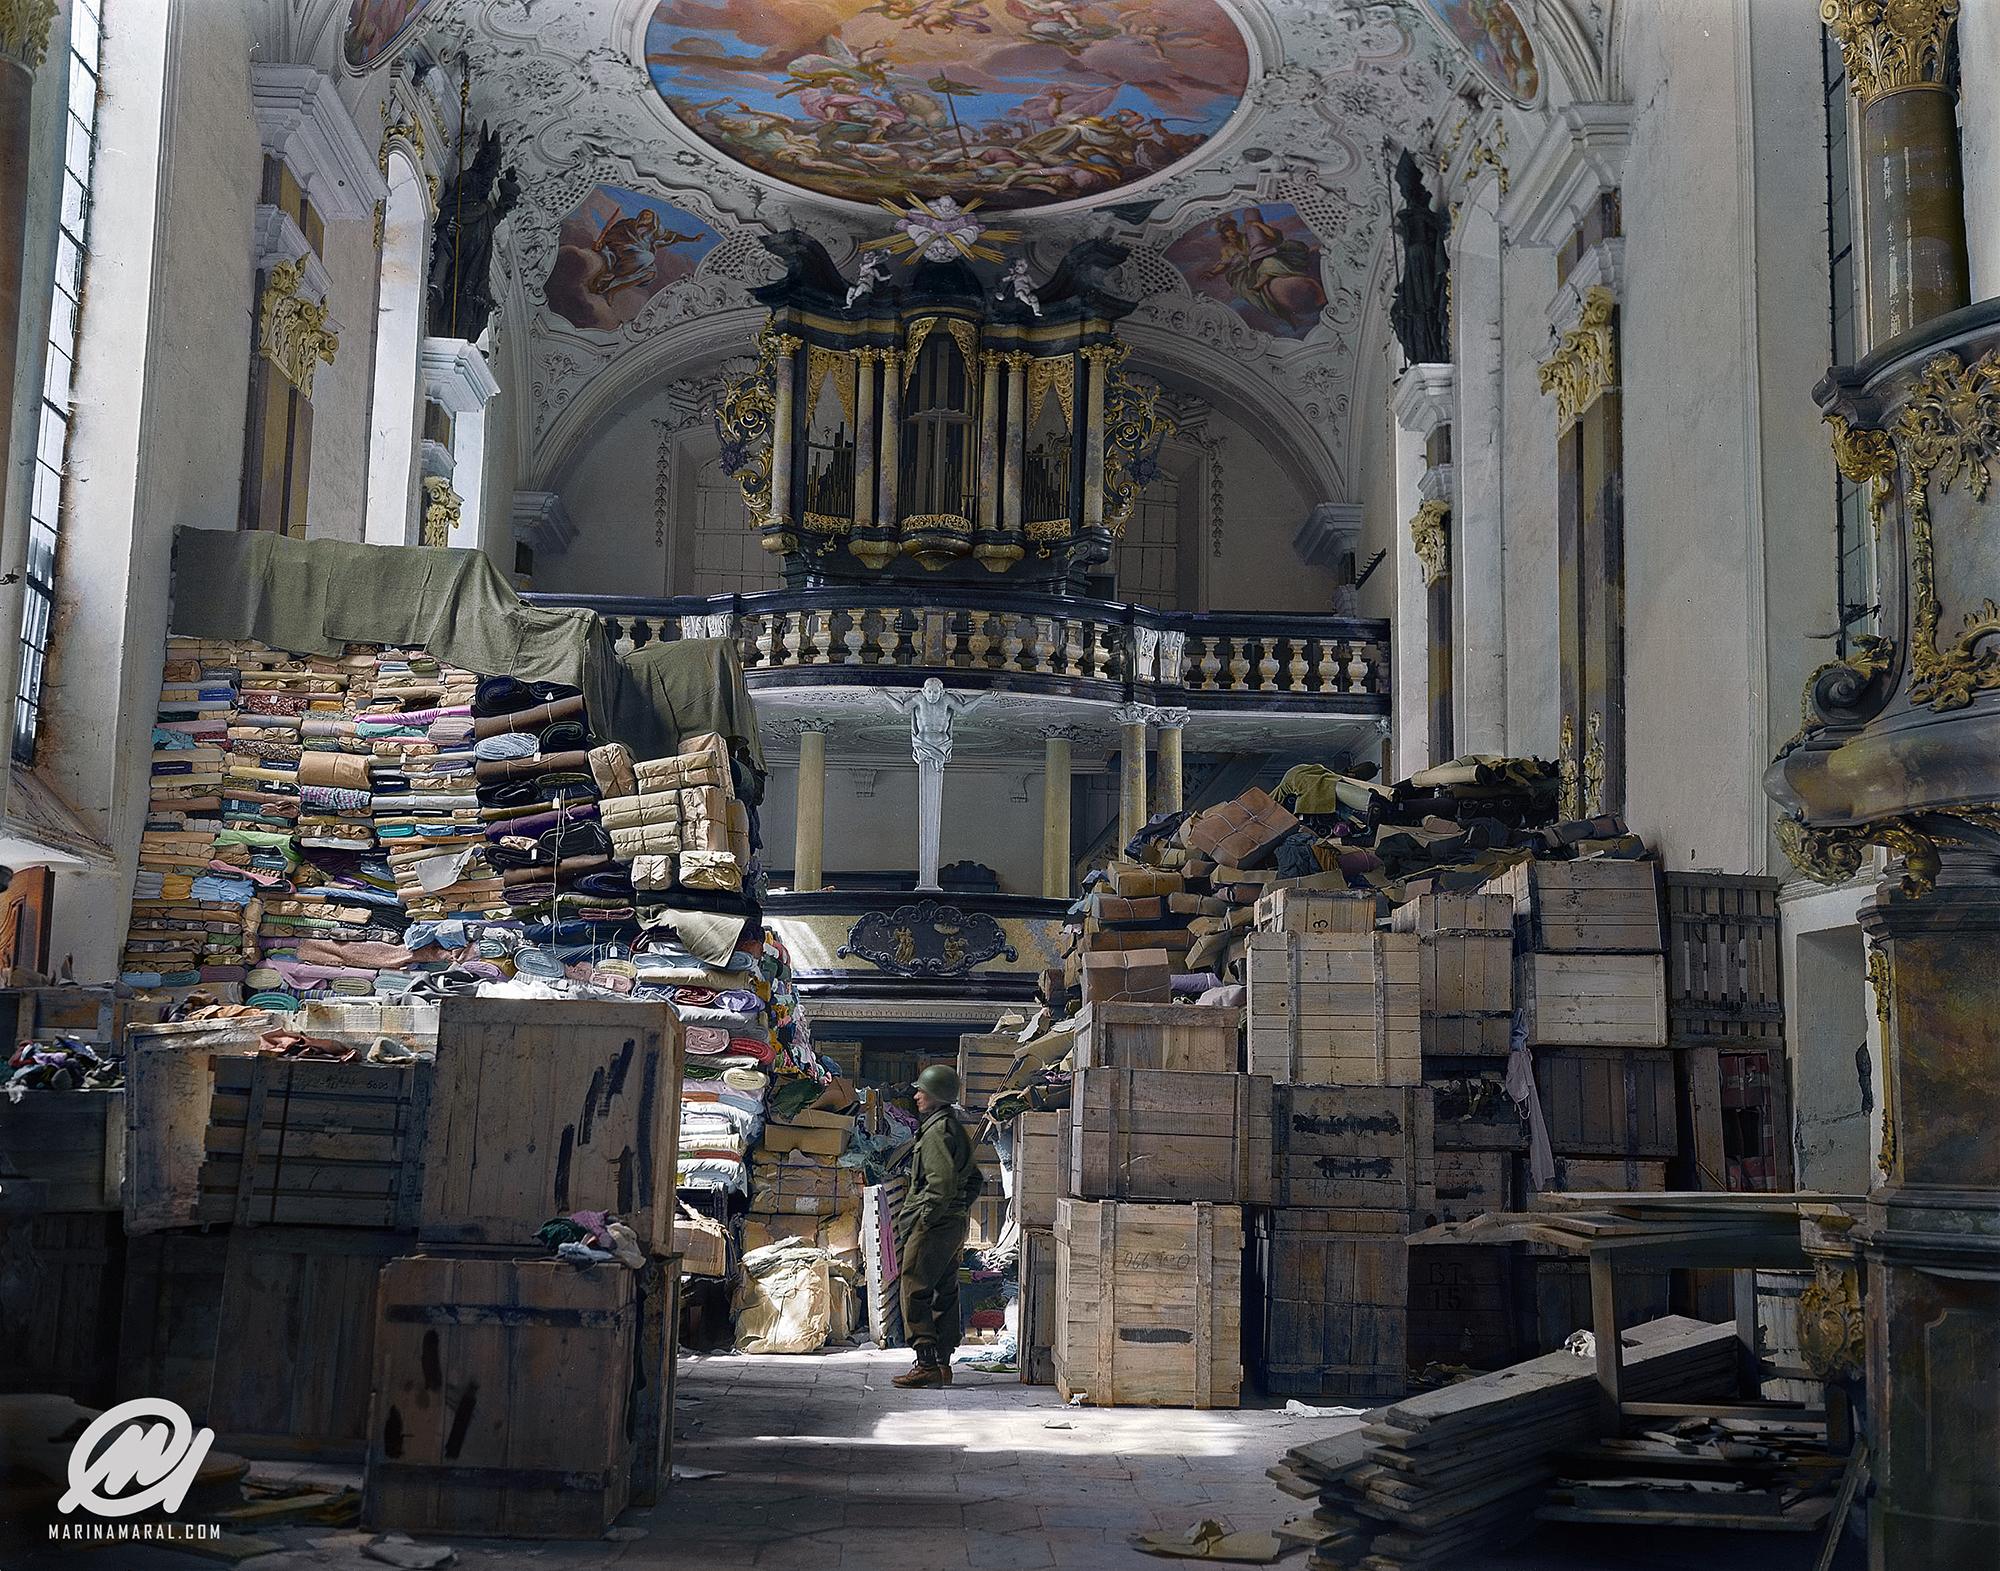 A US soldier stands amid crates and stacks of loot stored by Nazi Germany in Schlosskirche (Castle Church), Bavaria, 1945